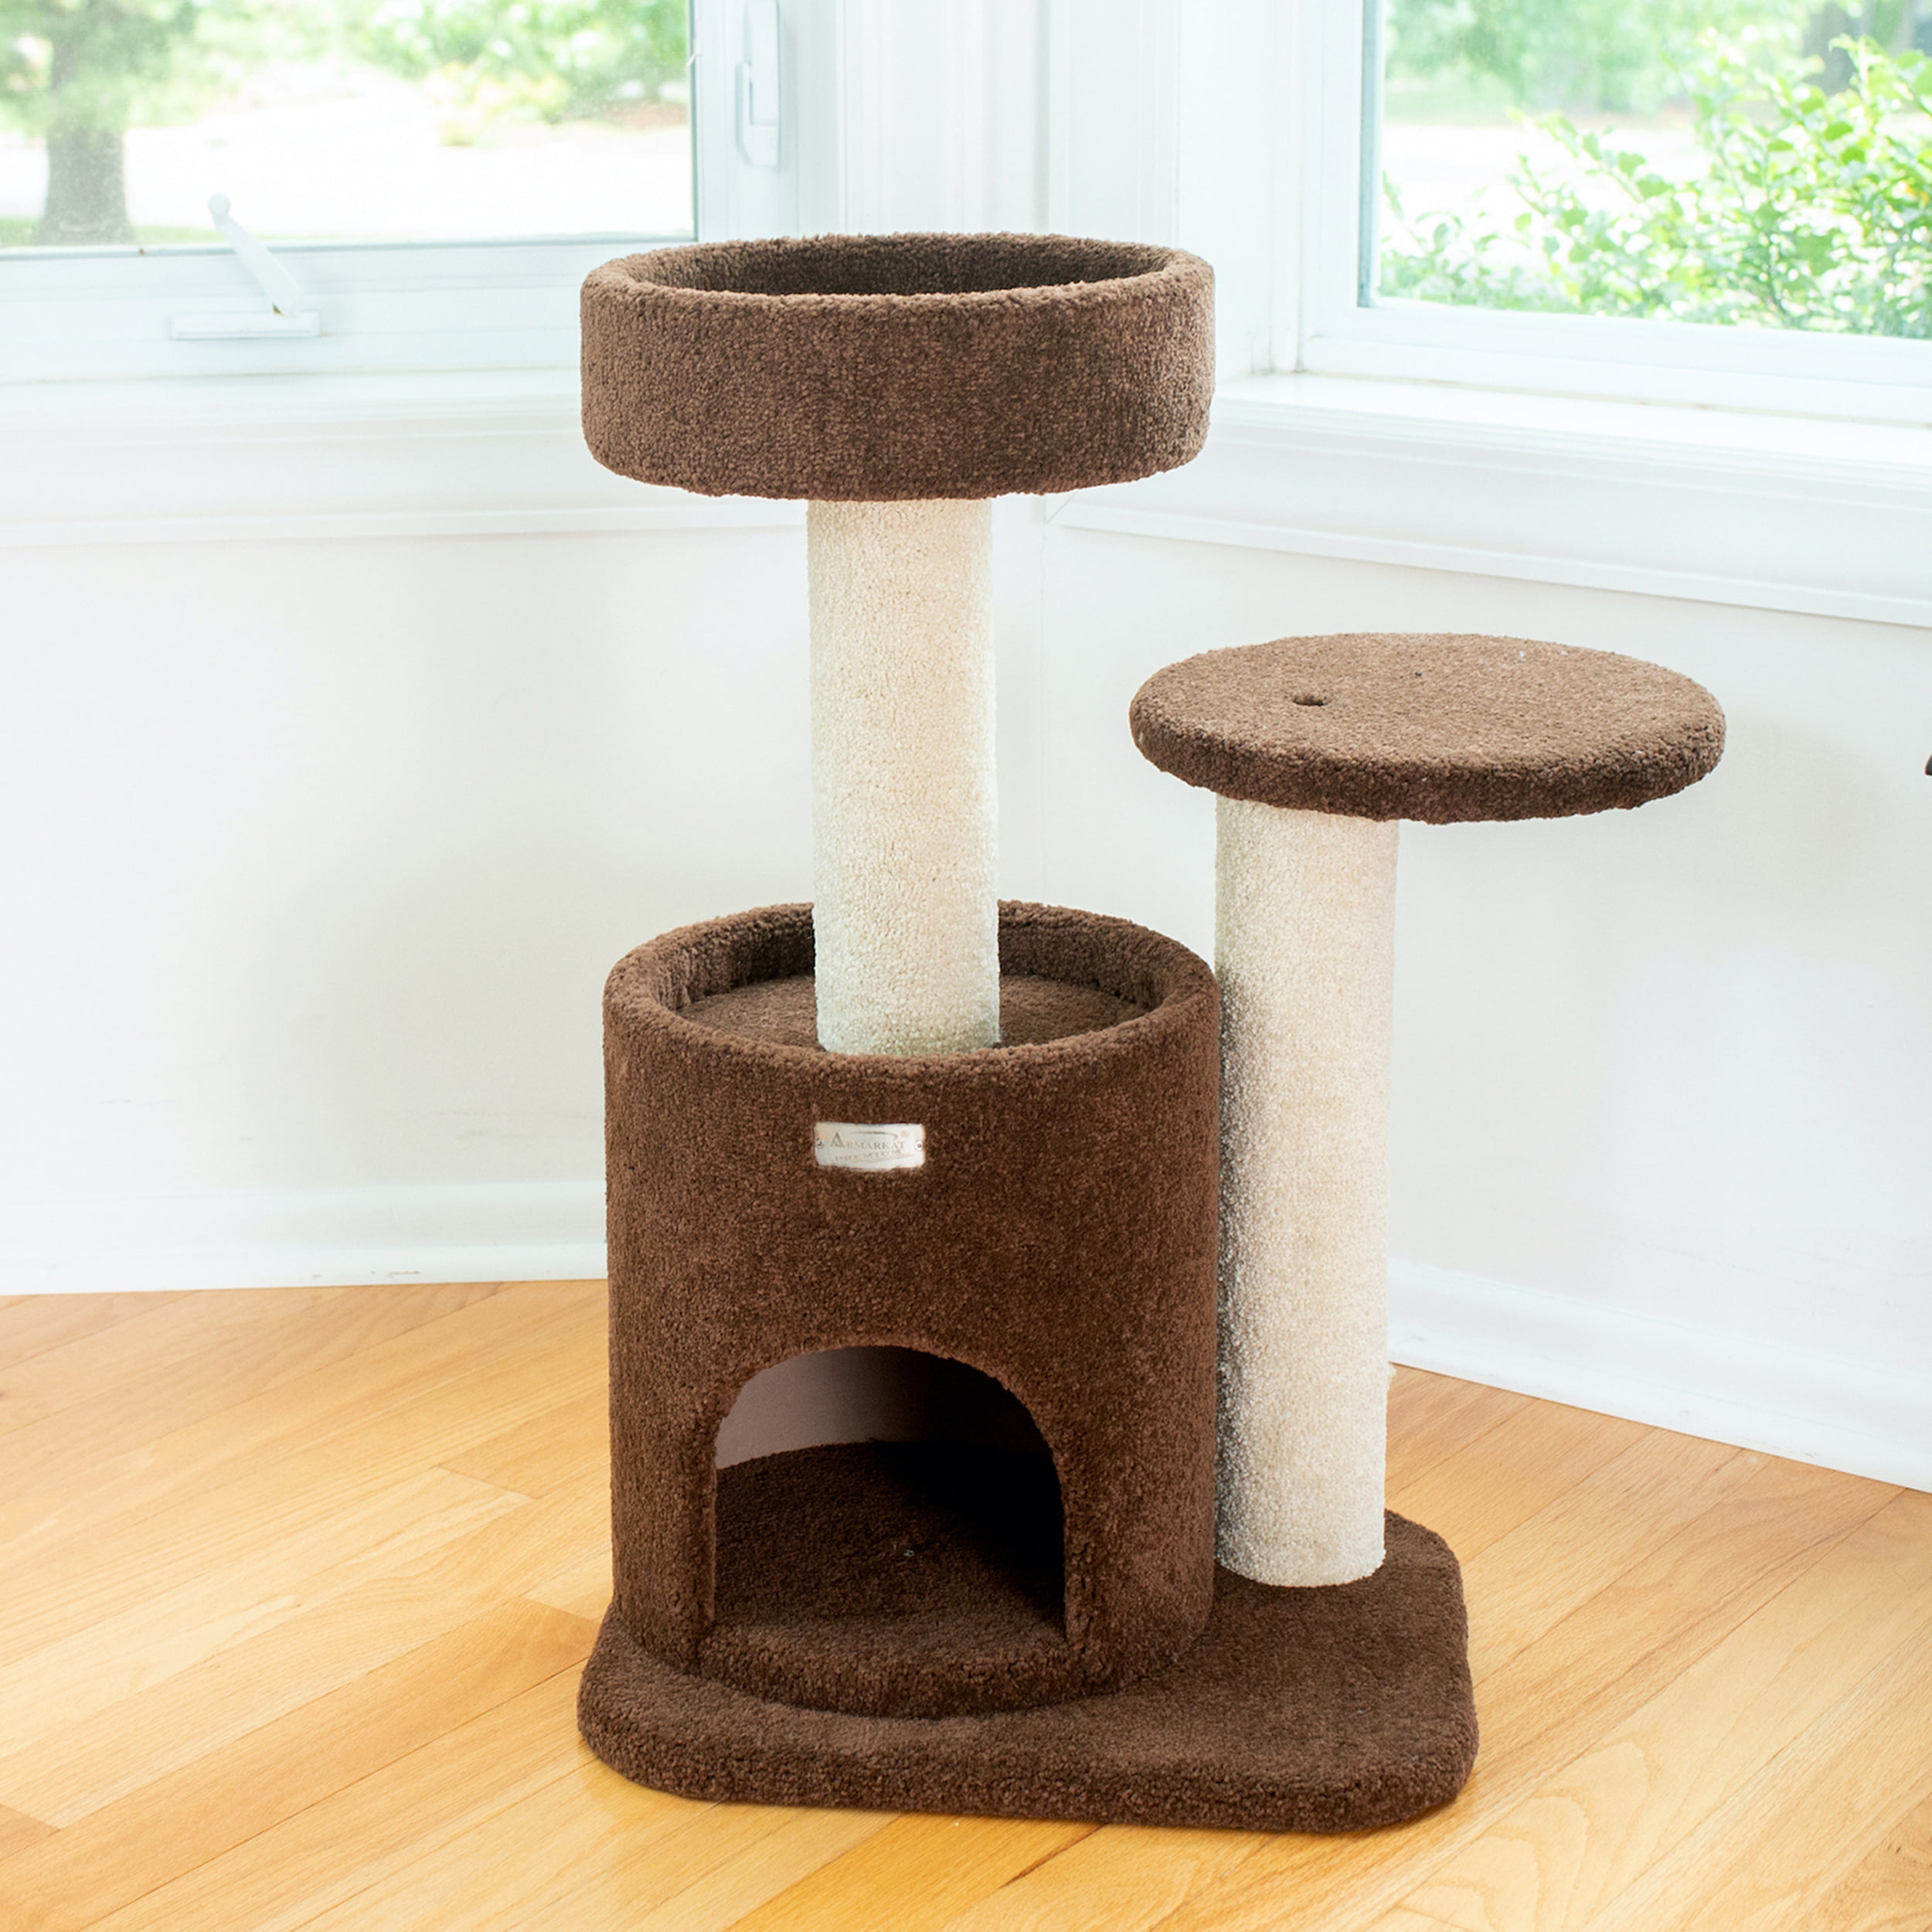 New Cat Condos Scratch And Lounge Cat Tree House Kitty Bed Brown Carpet Wood NEW 